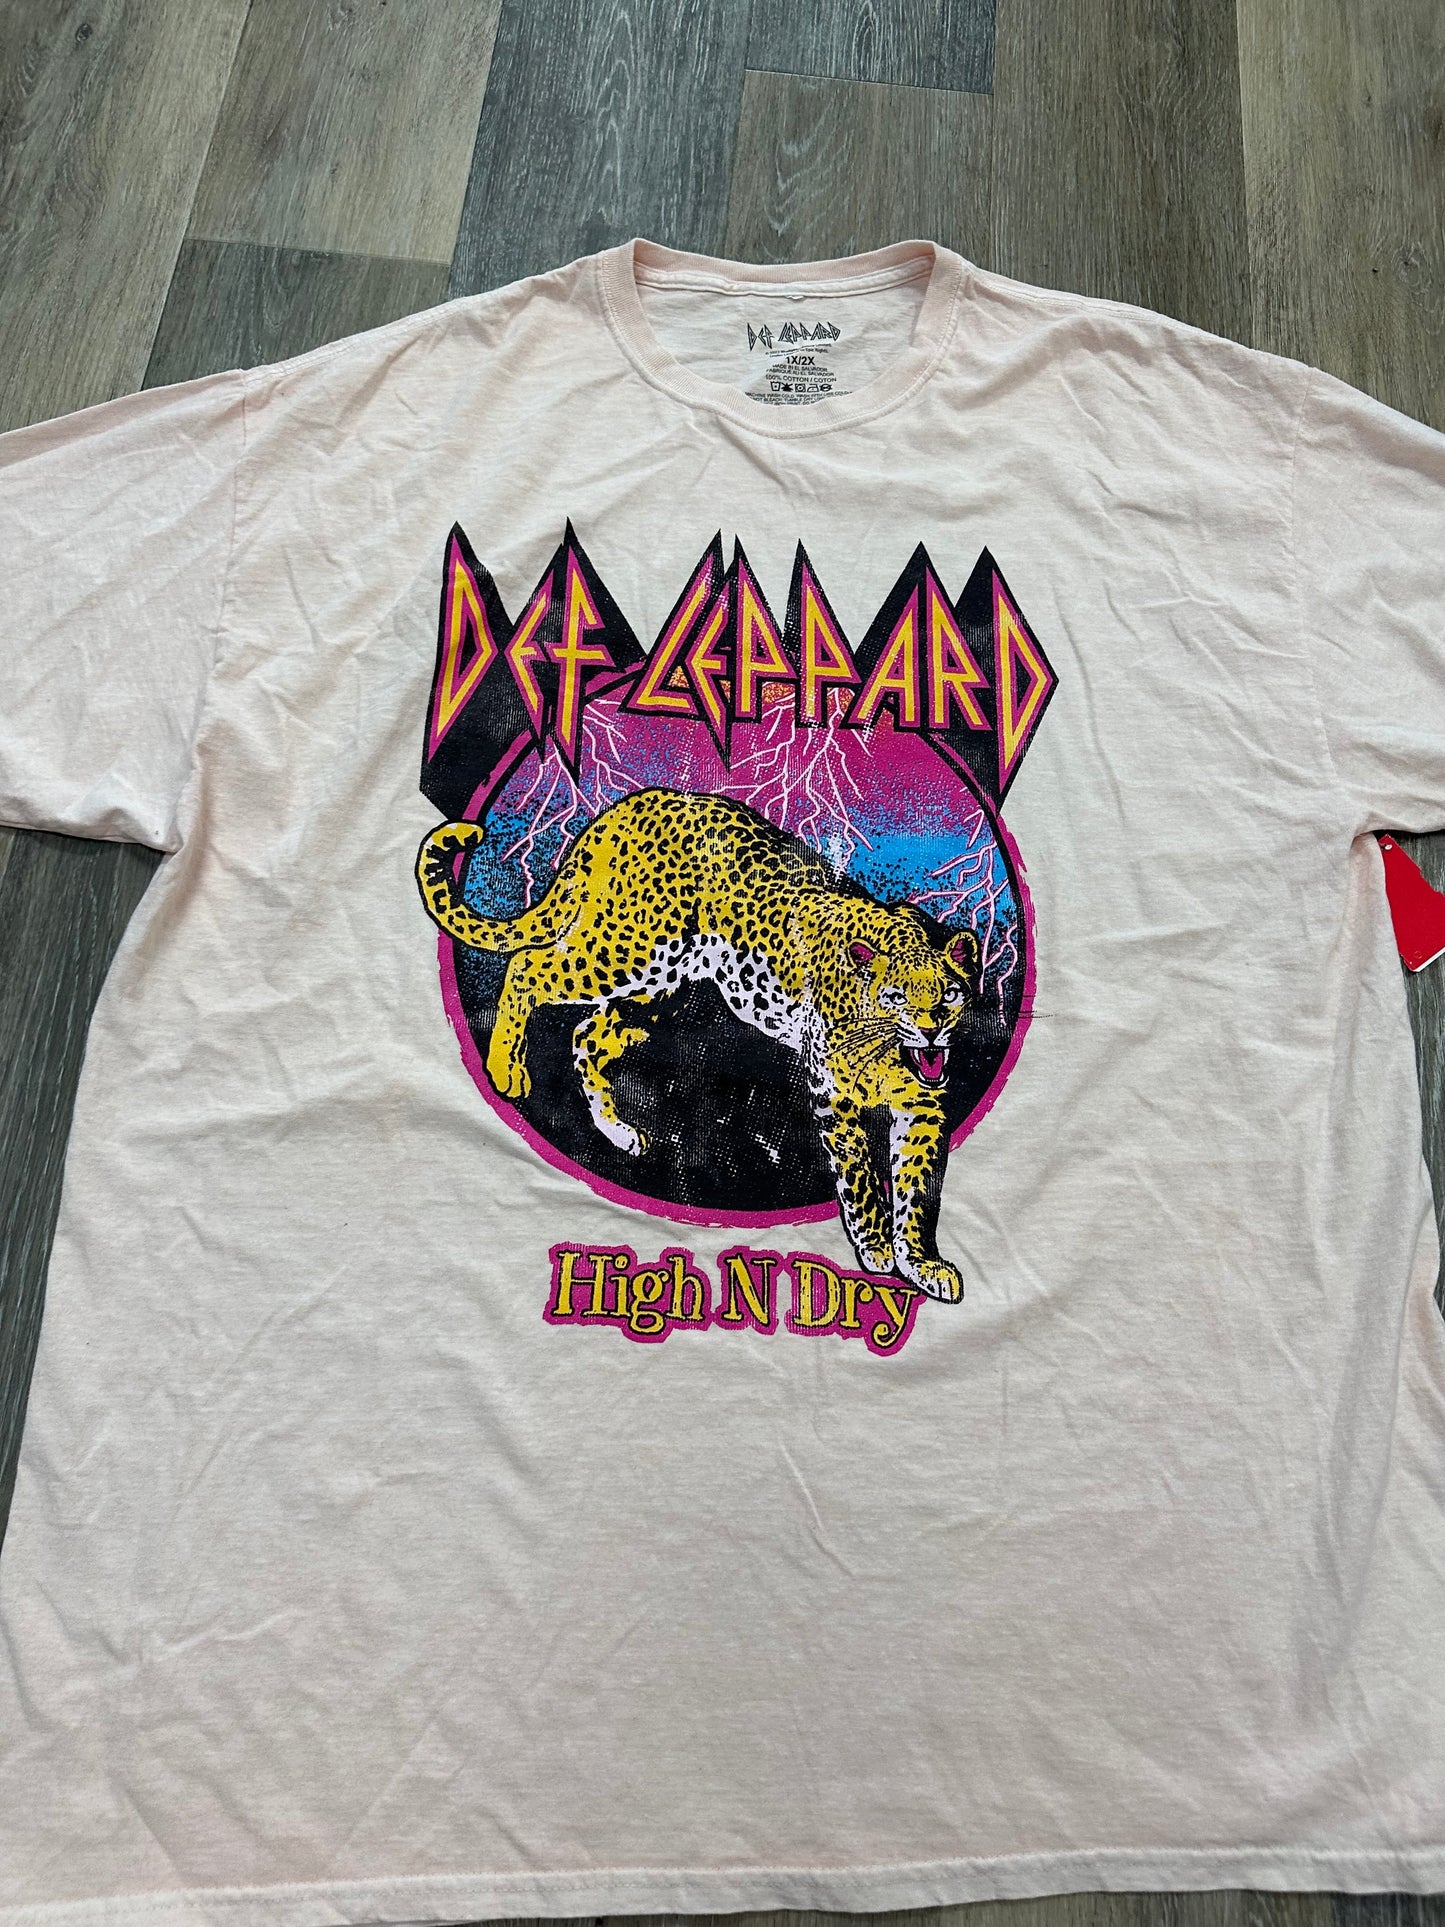 Multi-colored Top Short Sleeve Def Leppard, Size 1x